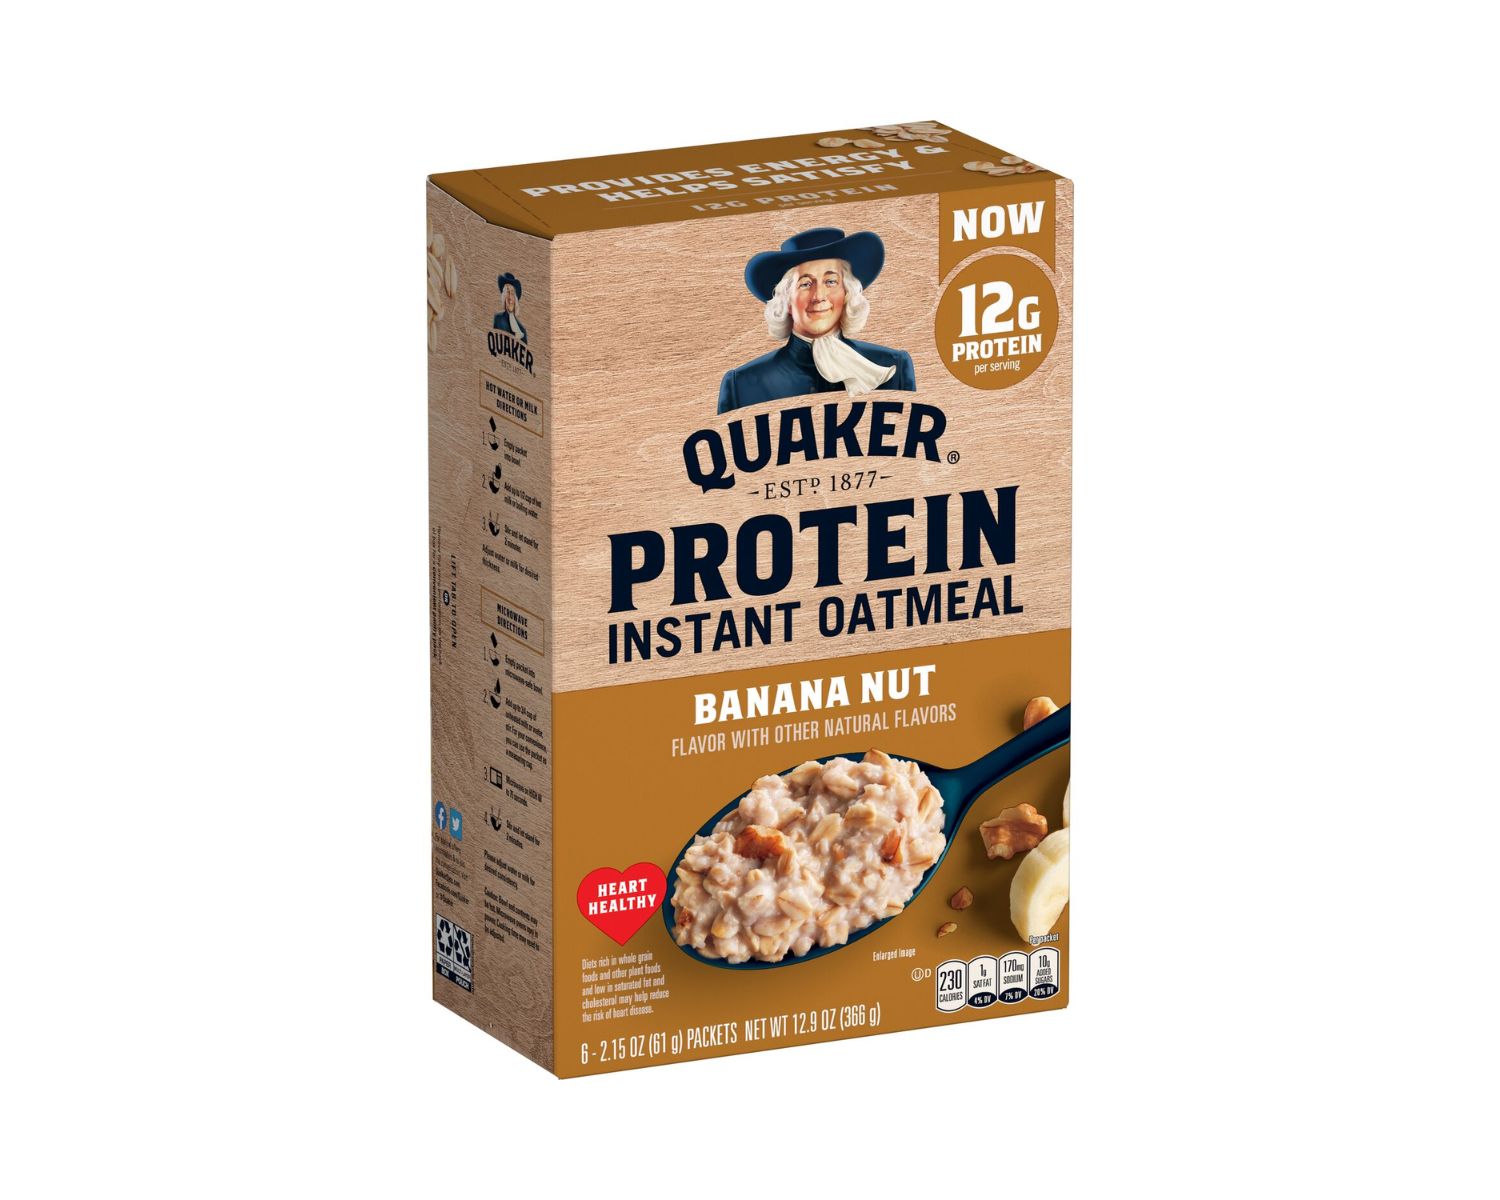 10-quaker-protein-oatmeal-nutrition-facts